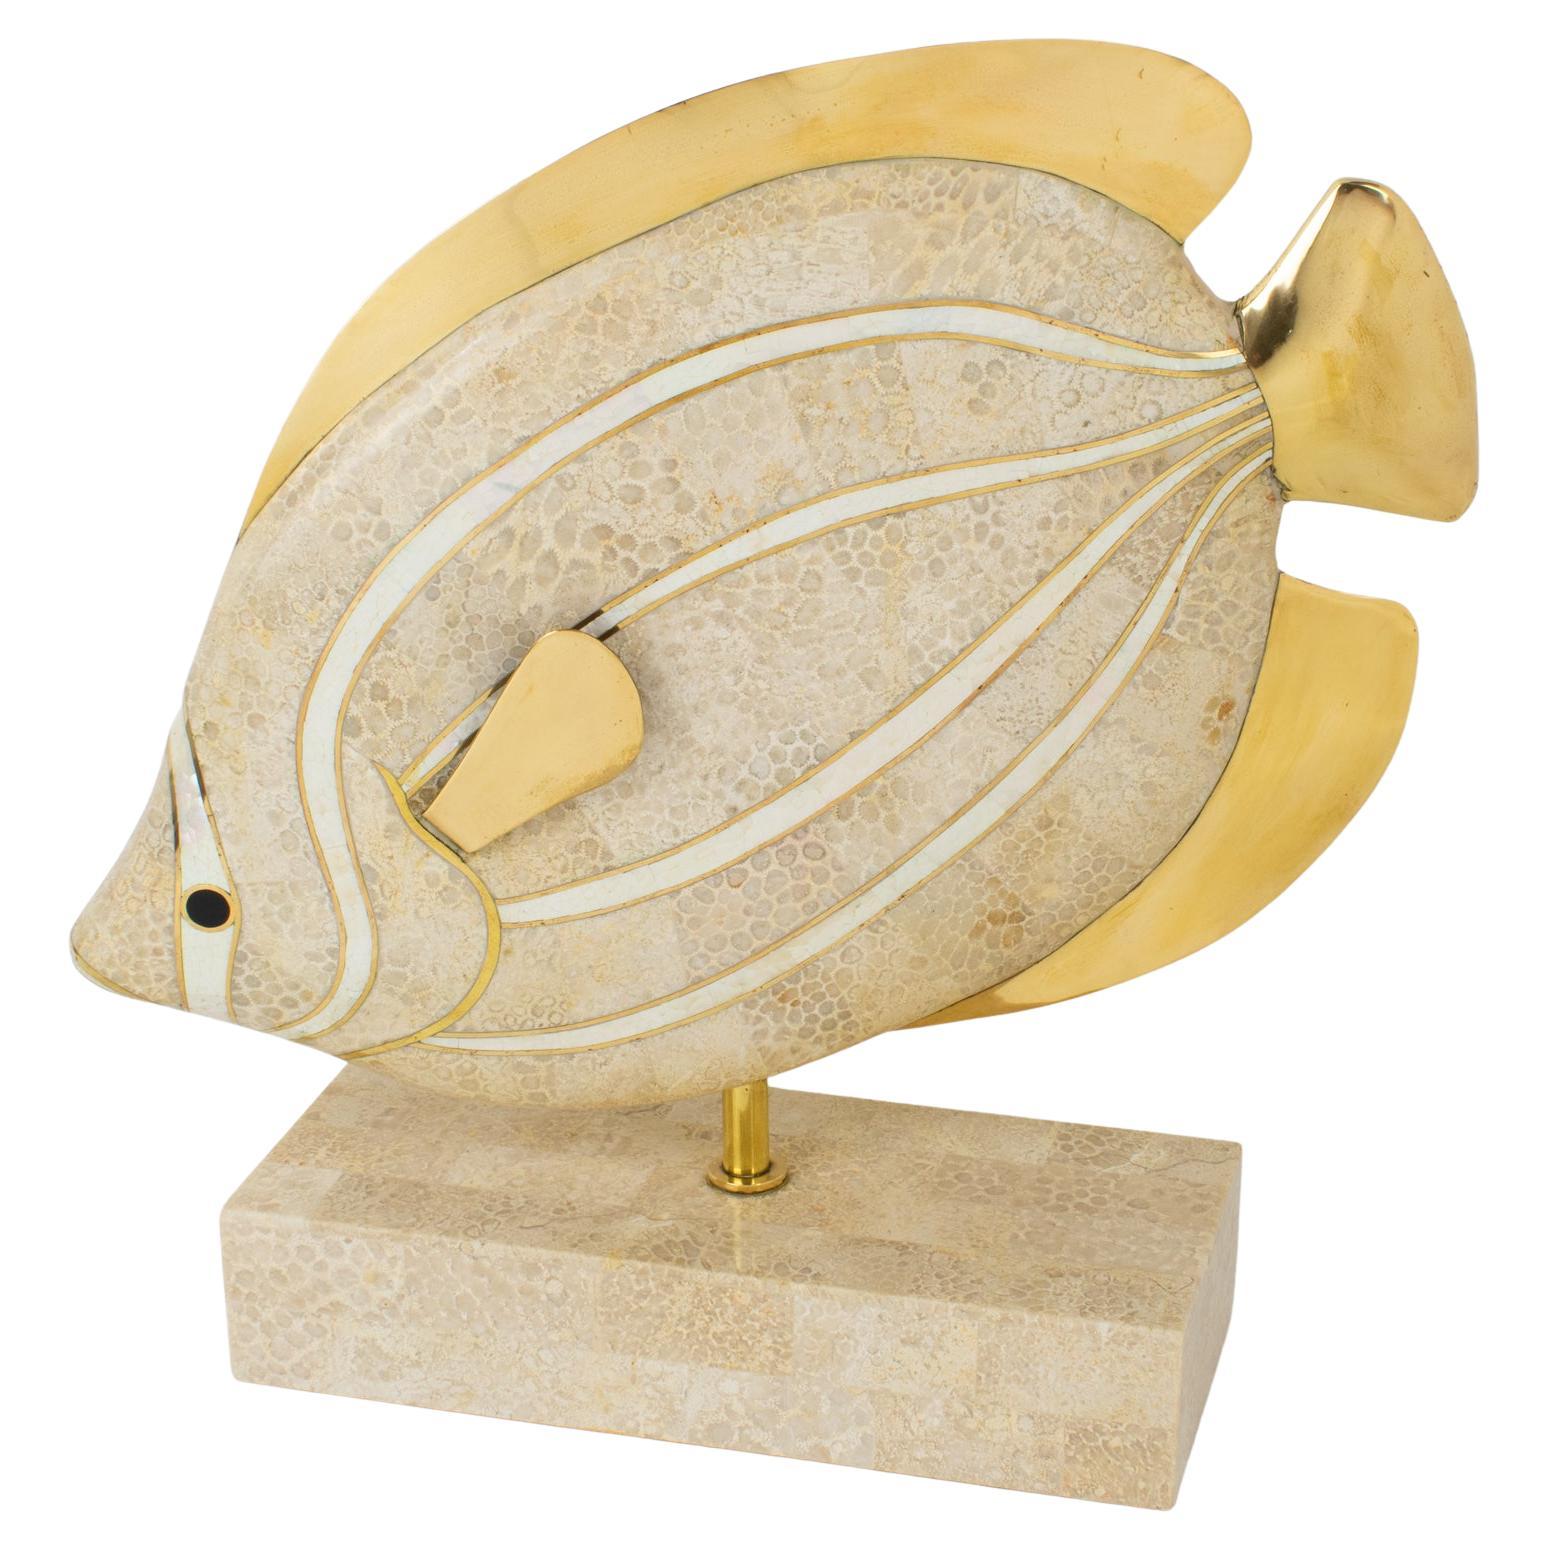 Maitland-Smith Tessellated Travertine, Marble and Brass Fish Sculpture